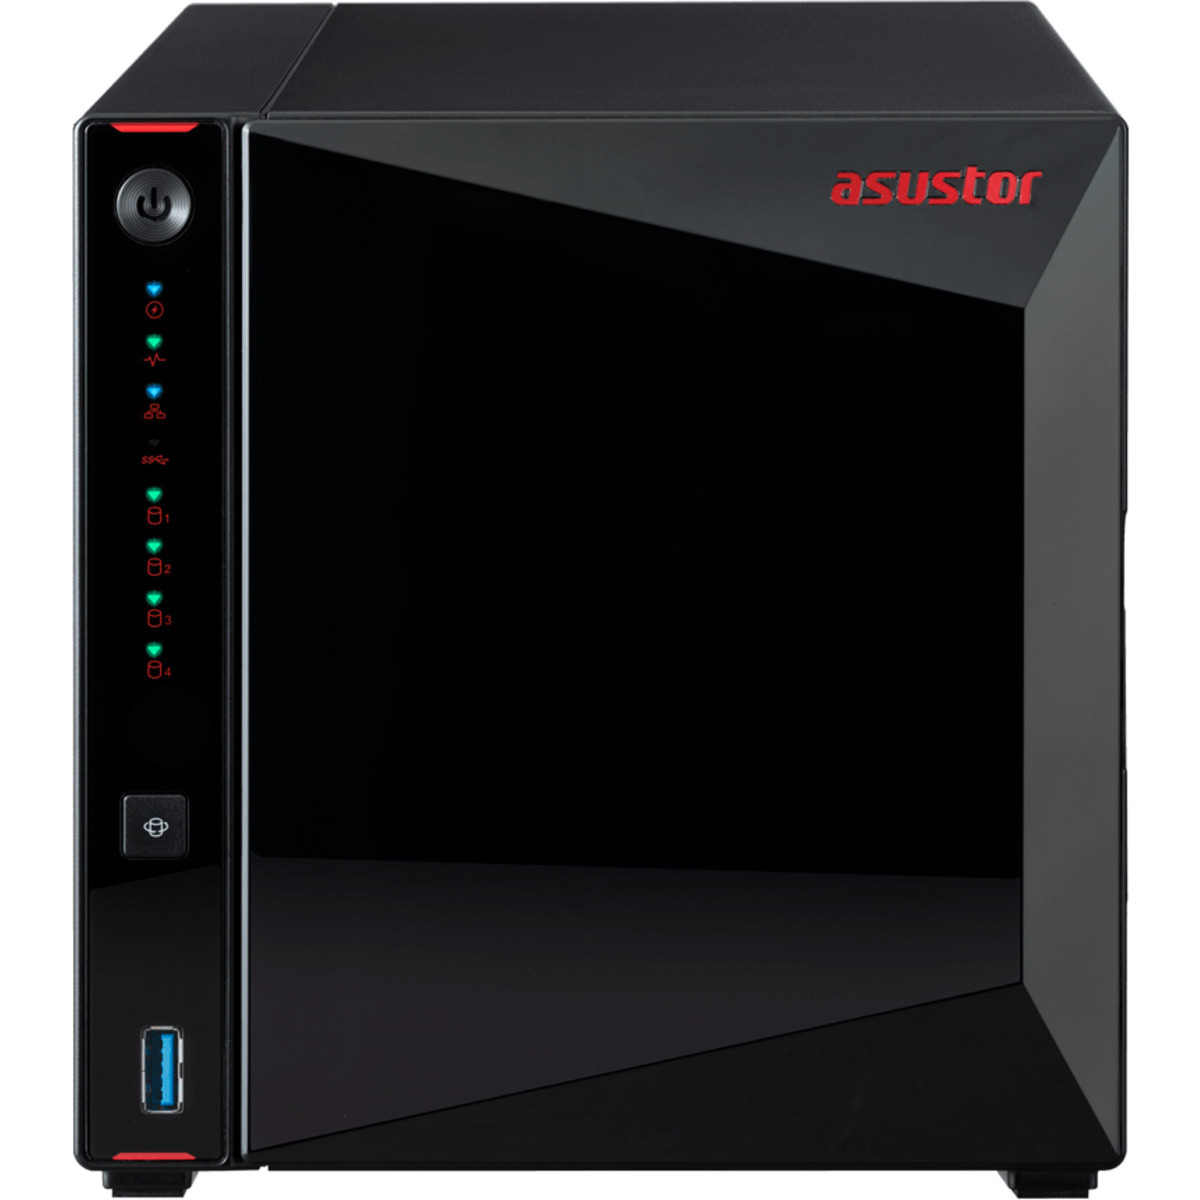 ASUSTOR AS5304T Nimbustor 32tb 4-Bay Desktop Multimedia / Power User / Business NAS - Network Attached Storage Device 4x8tb Samsung 870 QVO MZ-77Q8T0 2.5 560/530MB/s SATA 6Gb/s SSD CONSUMER Class Drives Installed - Burn-In Tested - FREE RAM UPGRADE AS5304T Nimbustor